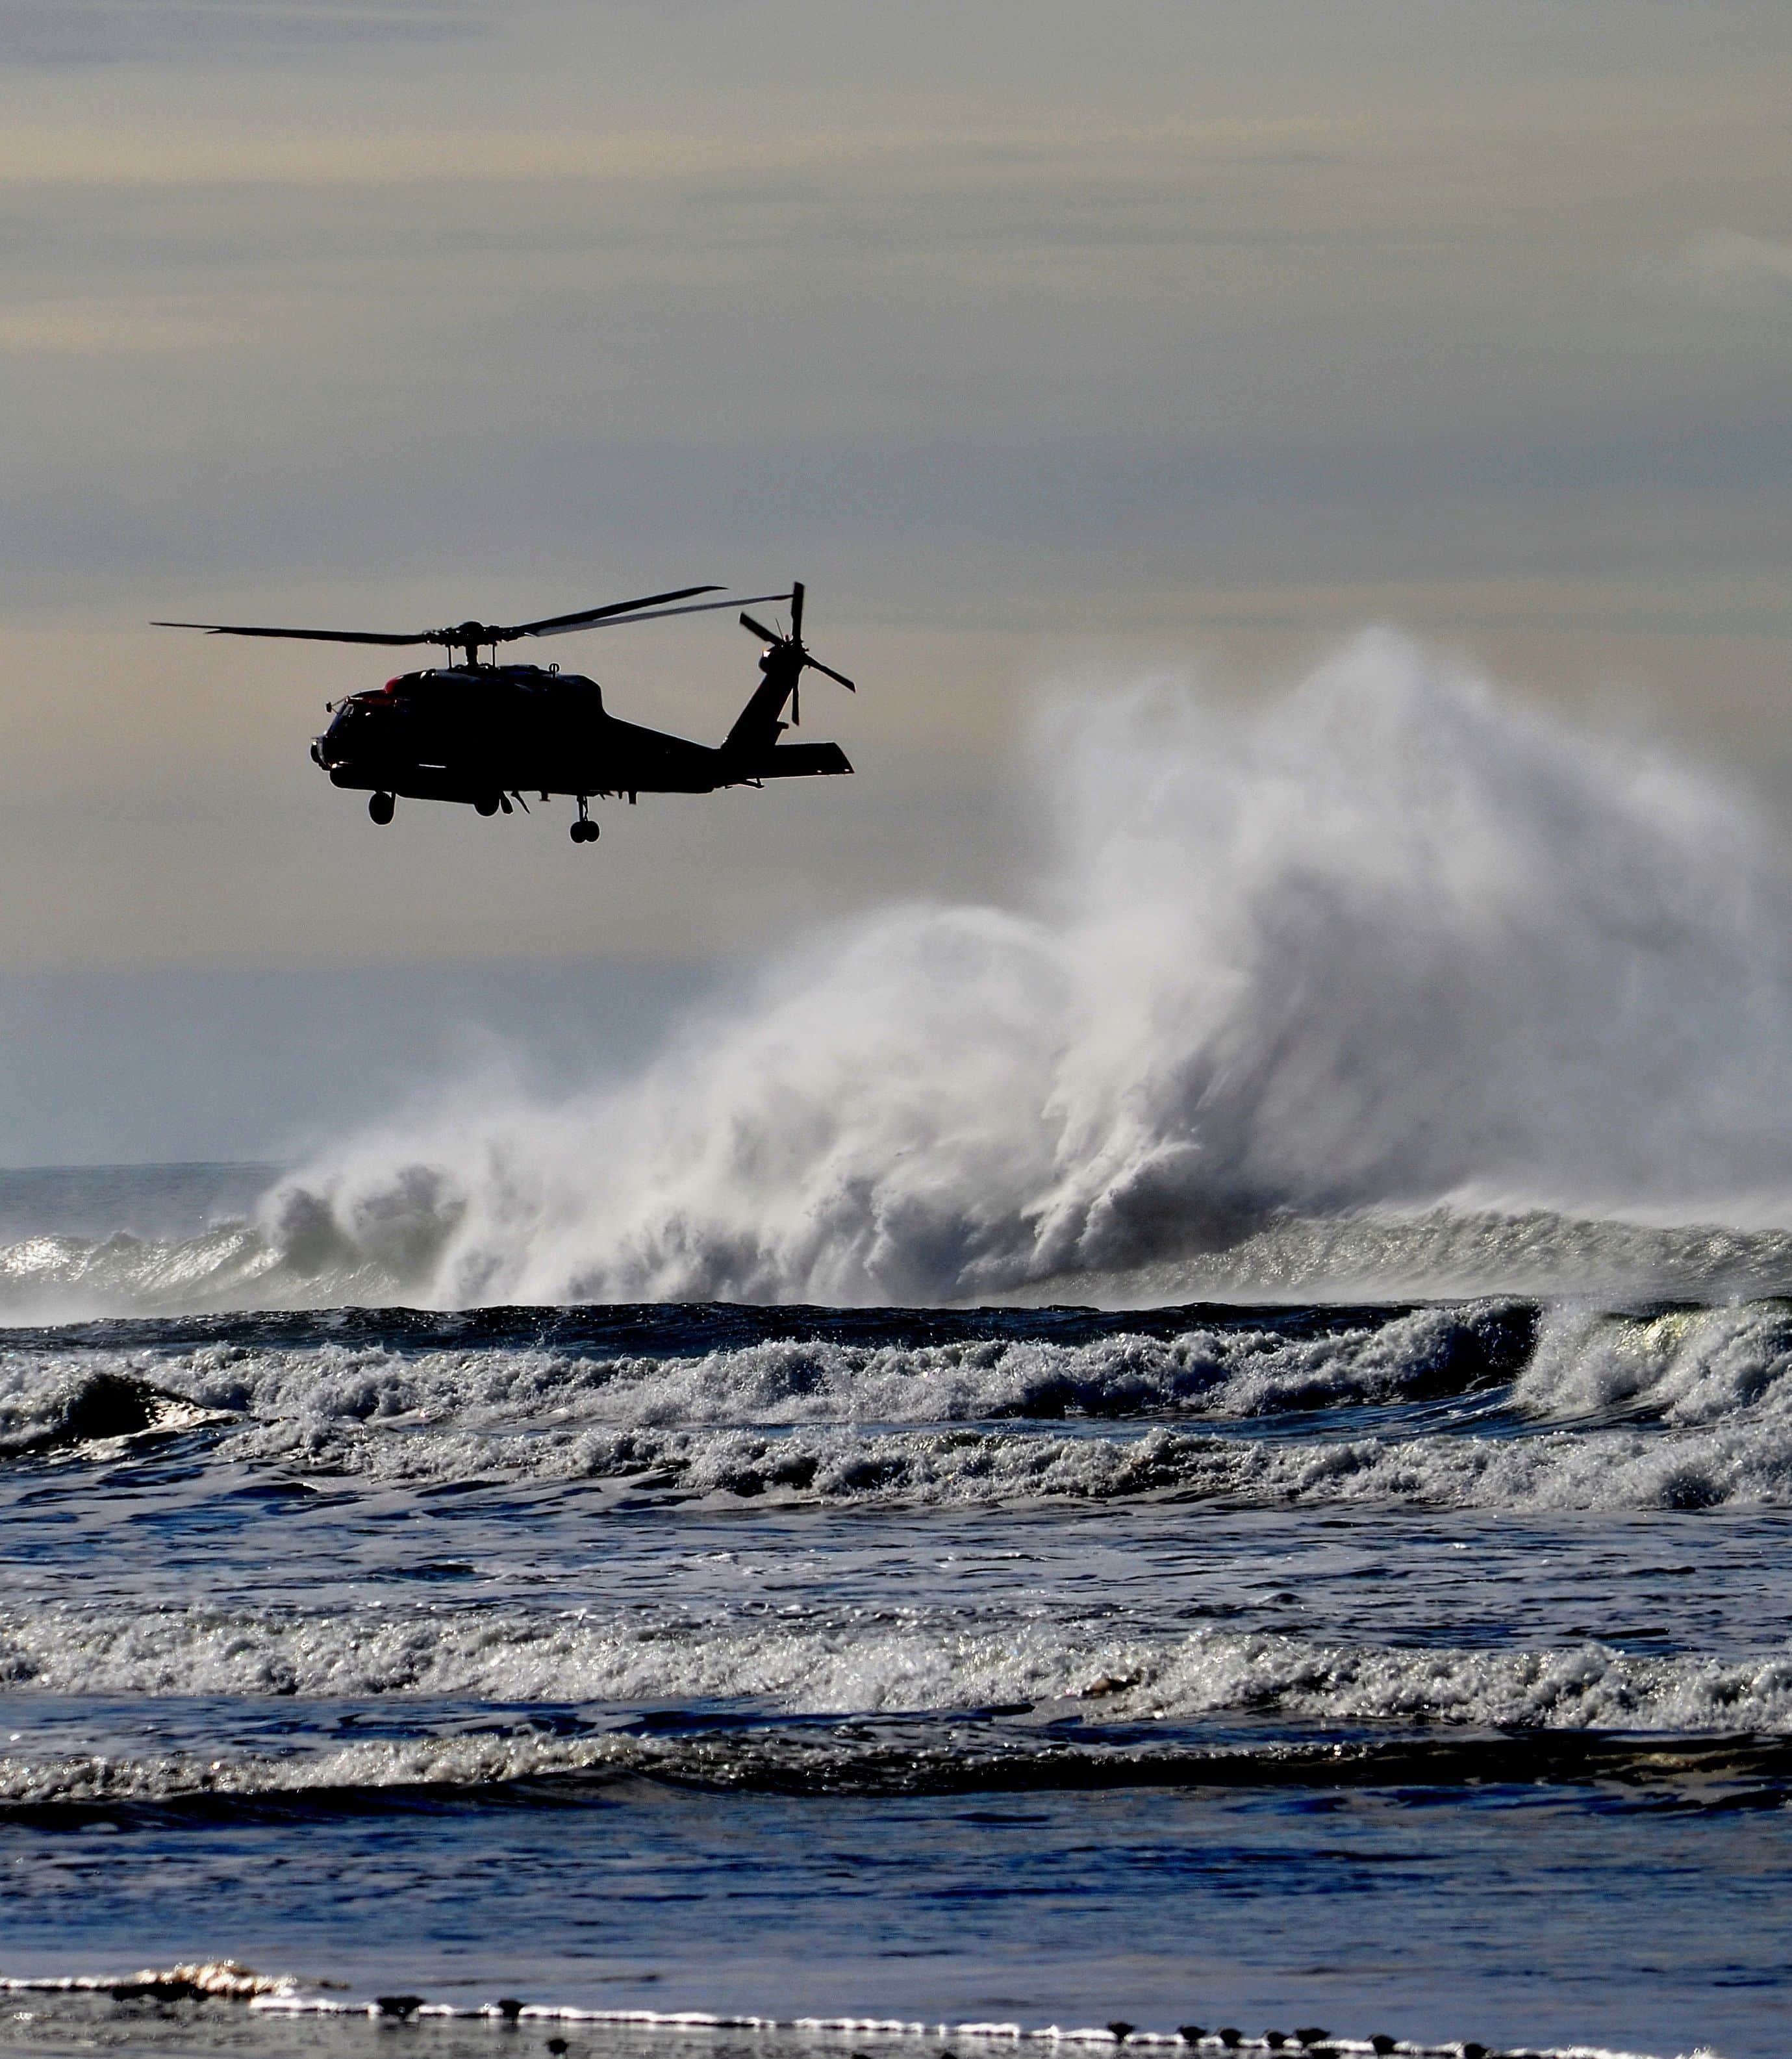 LONG BEACH, US - Apr 19, 2021: A vertical of the silhouette of a helicopter flying above the big foamy waves at the Washington Coast